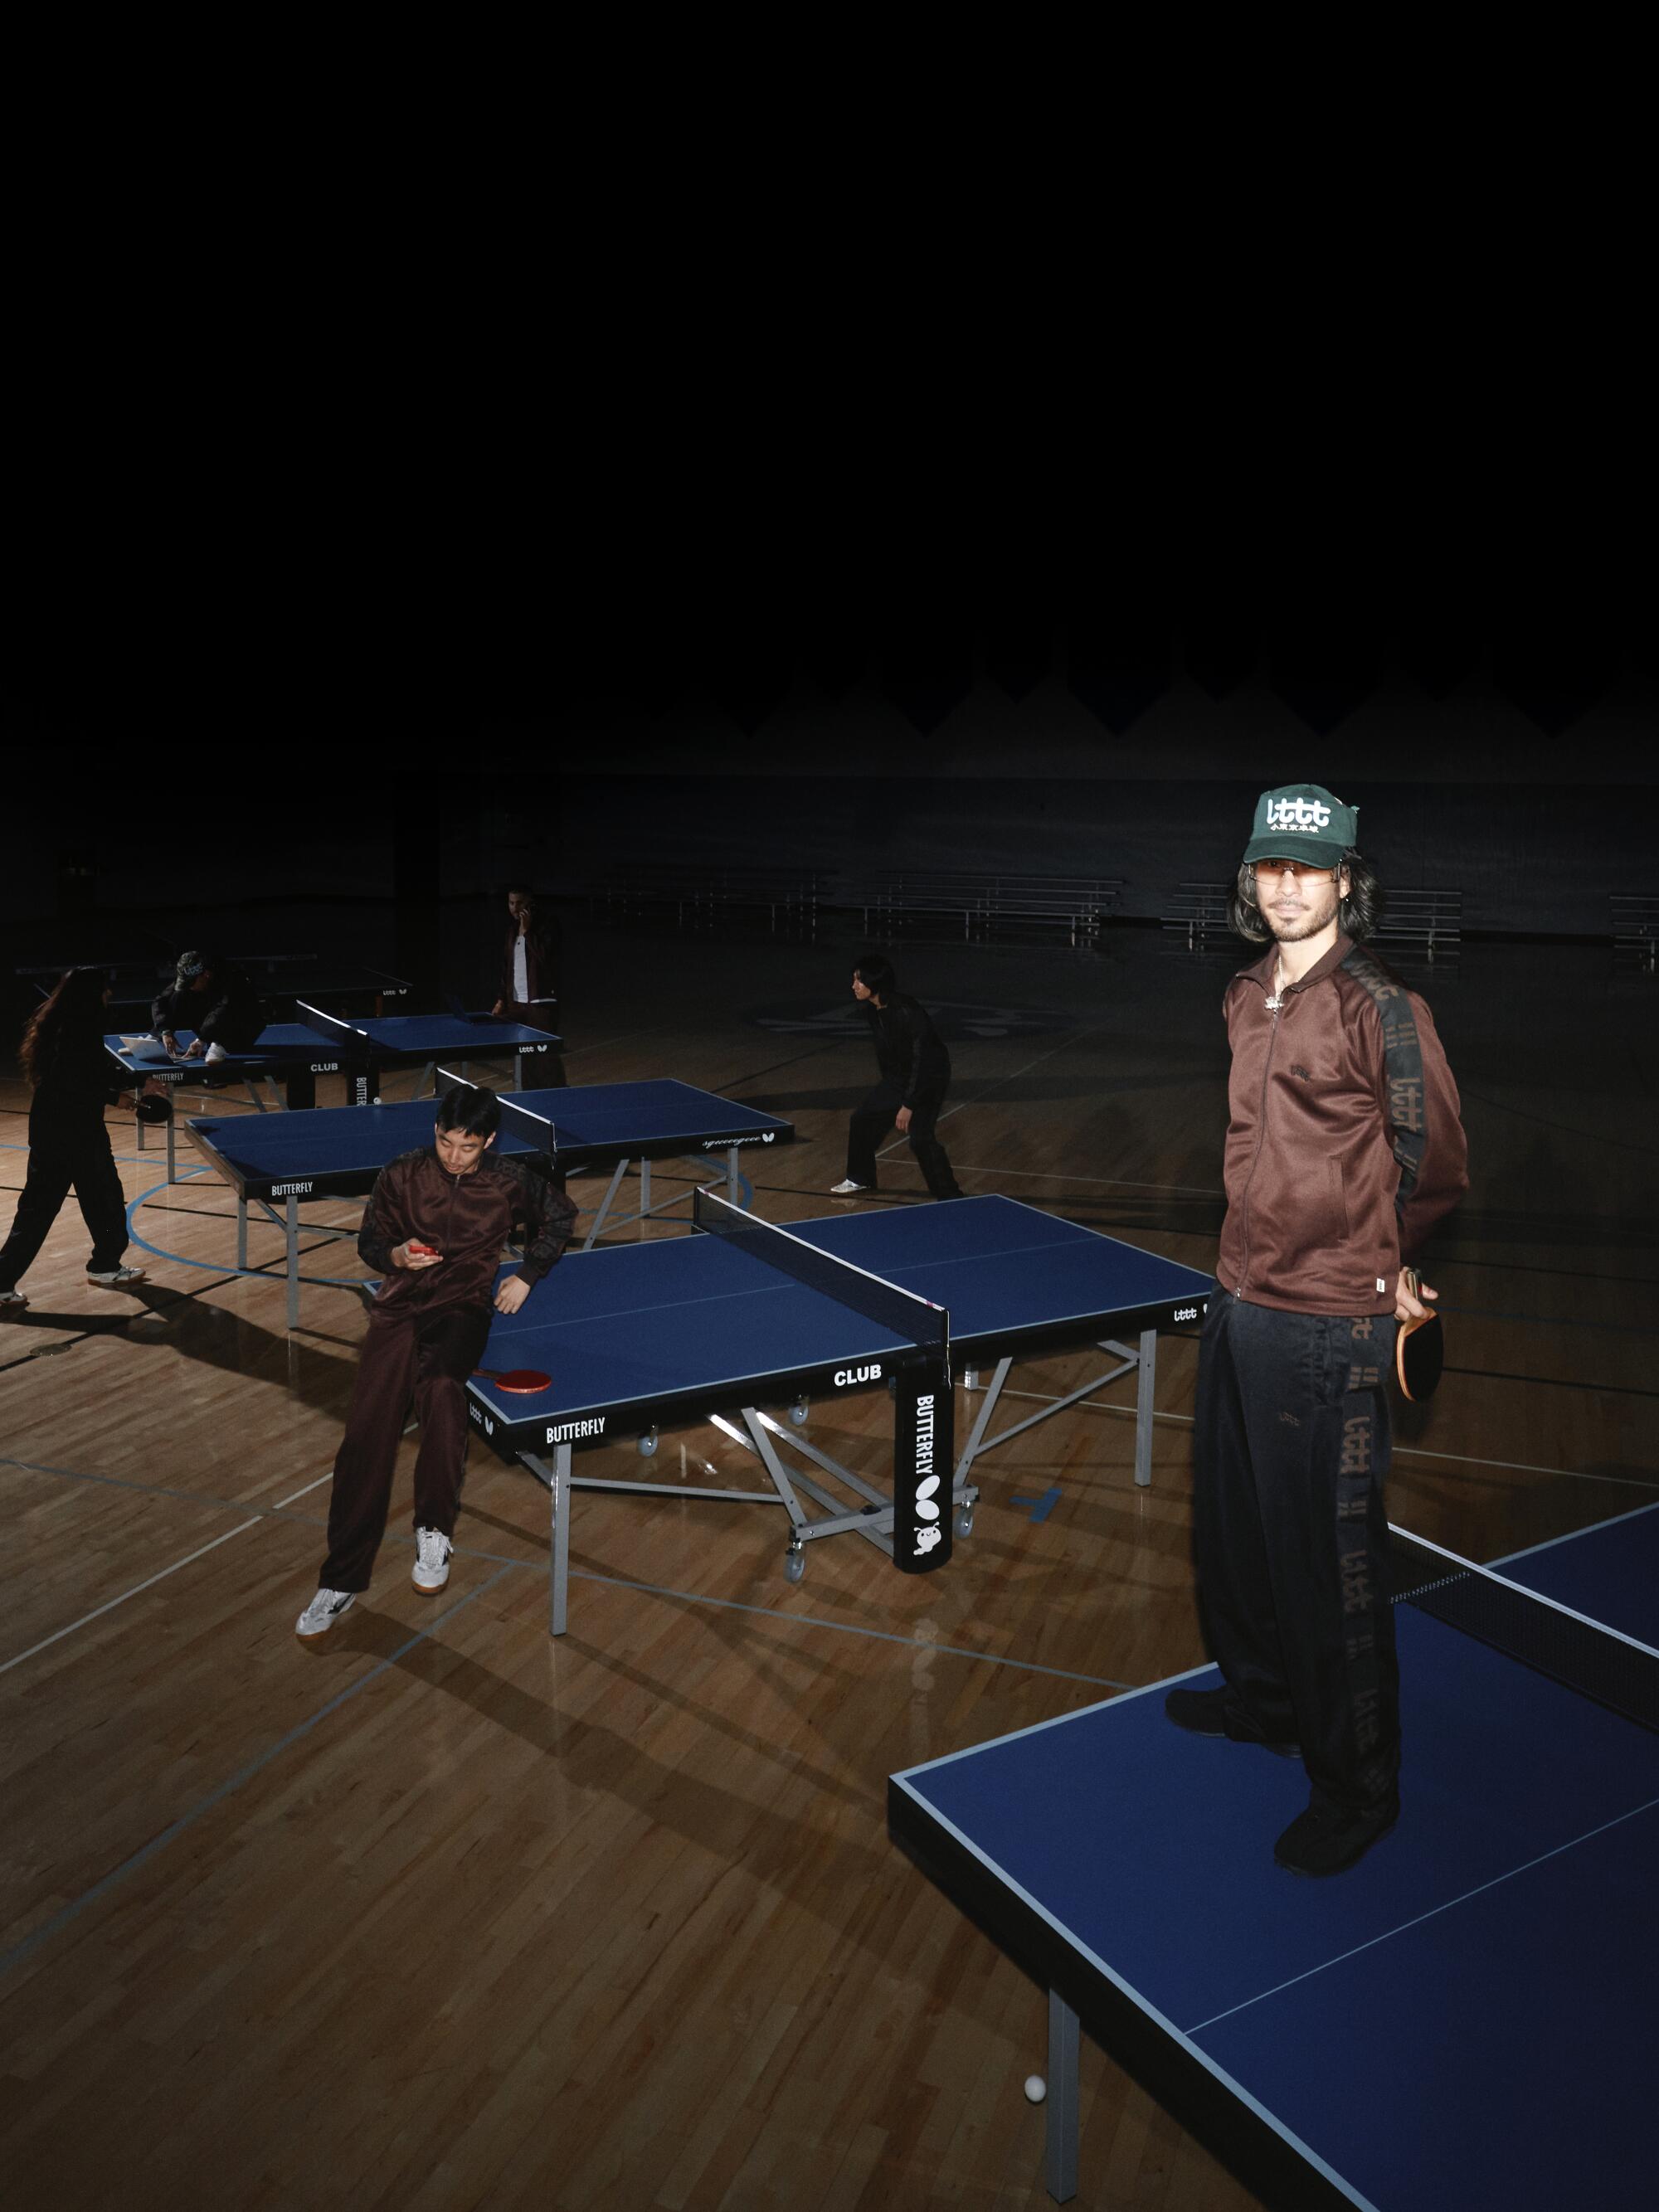 A man stands on a table tennis table, while other people play table tennis in the background.